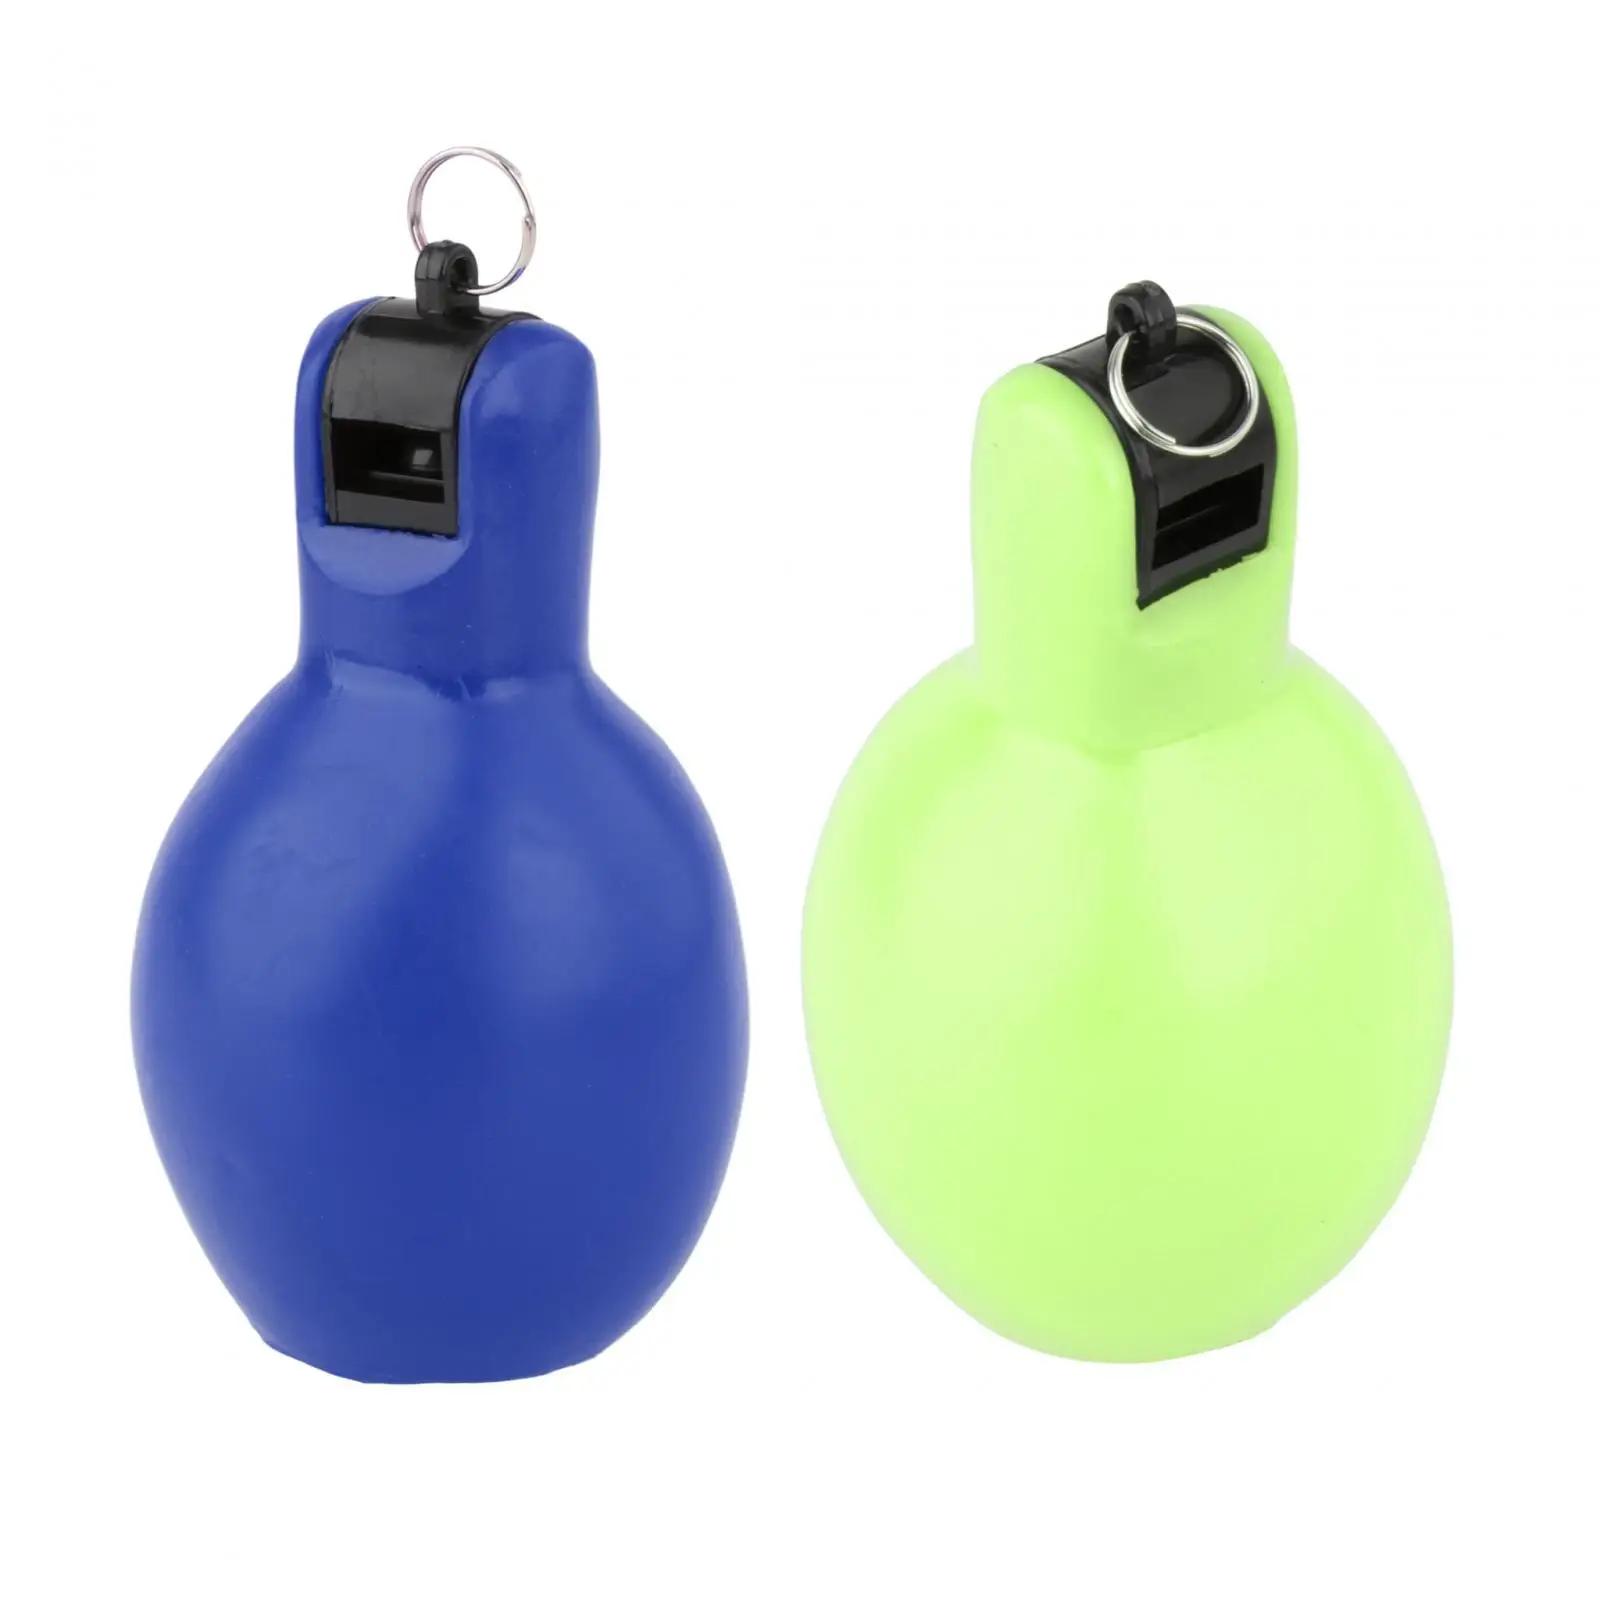 2Pcs Hand Squeeze Whistles Loud Manual Handheld Soft PVC Sports Whistle for Training Indoor Outdoor Walking Home School Coaches